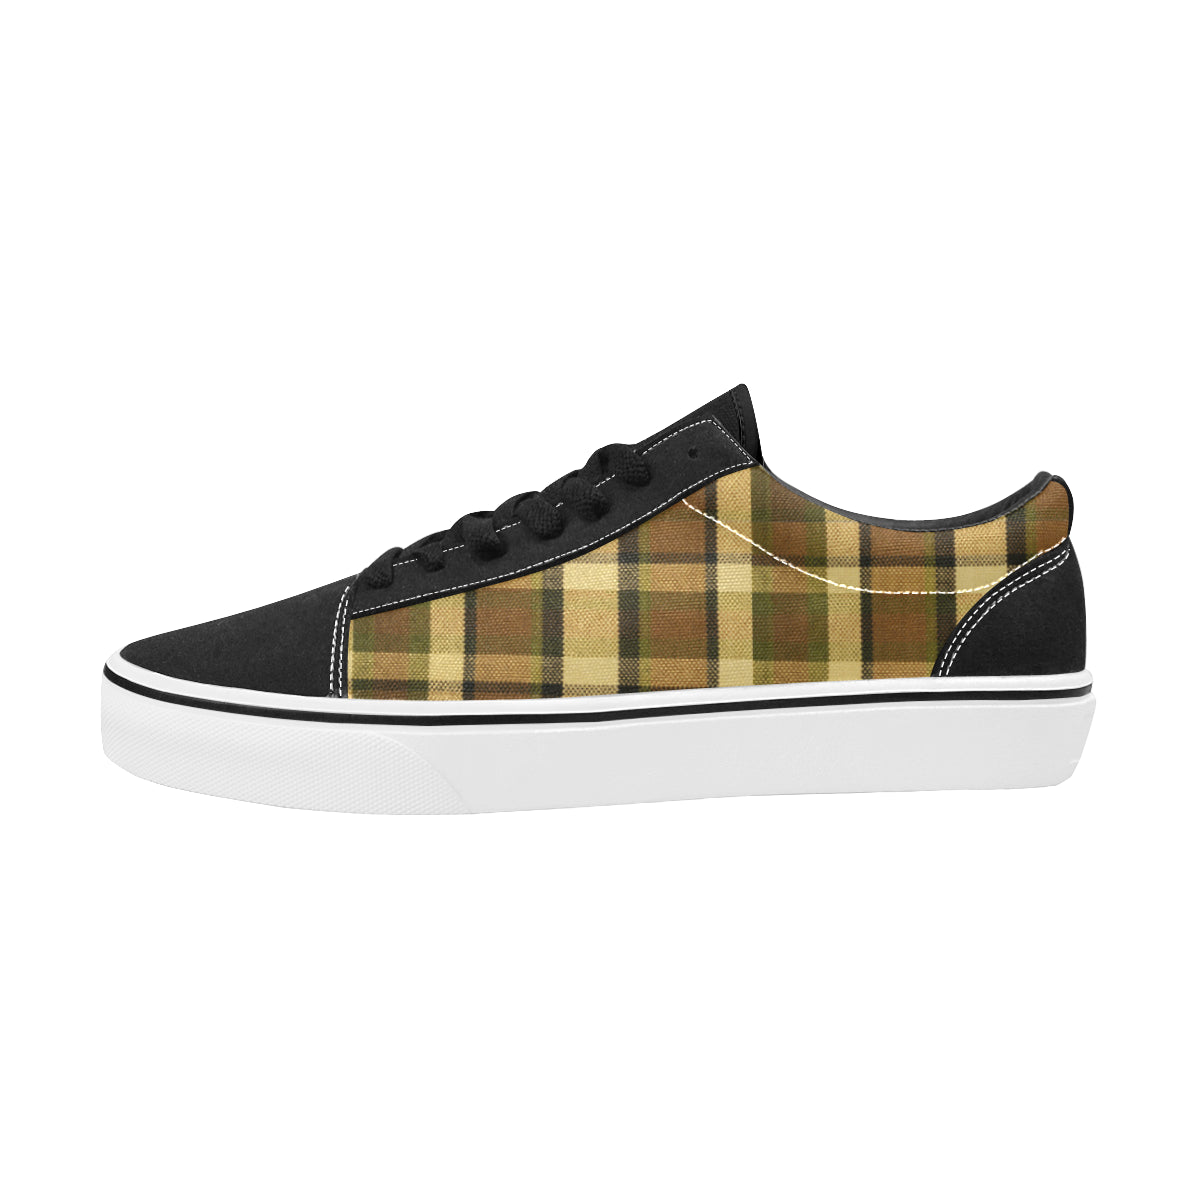 Westy Brown Plaid Men's Low Top Skateboarding Shoes